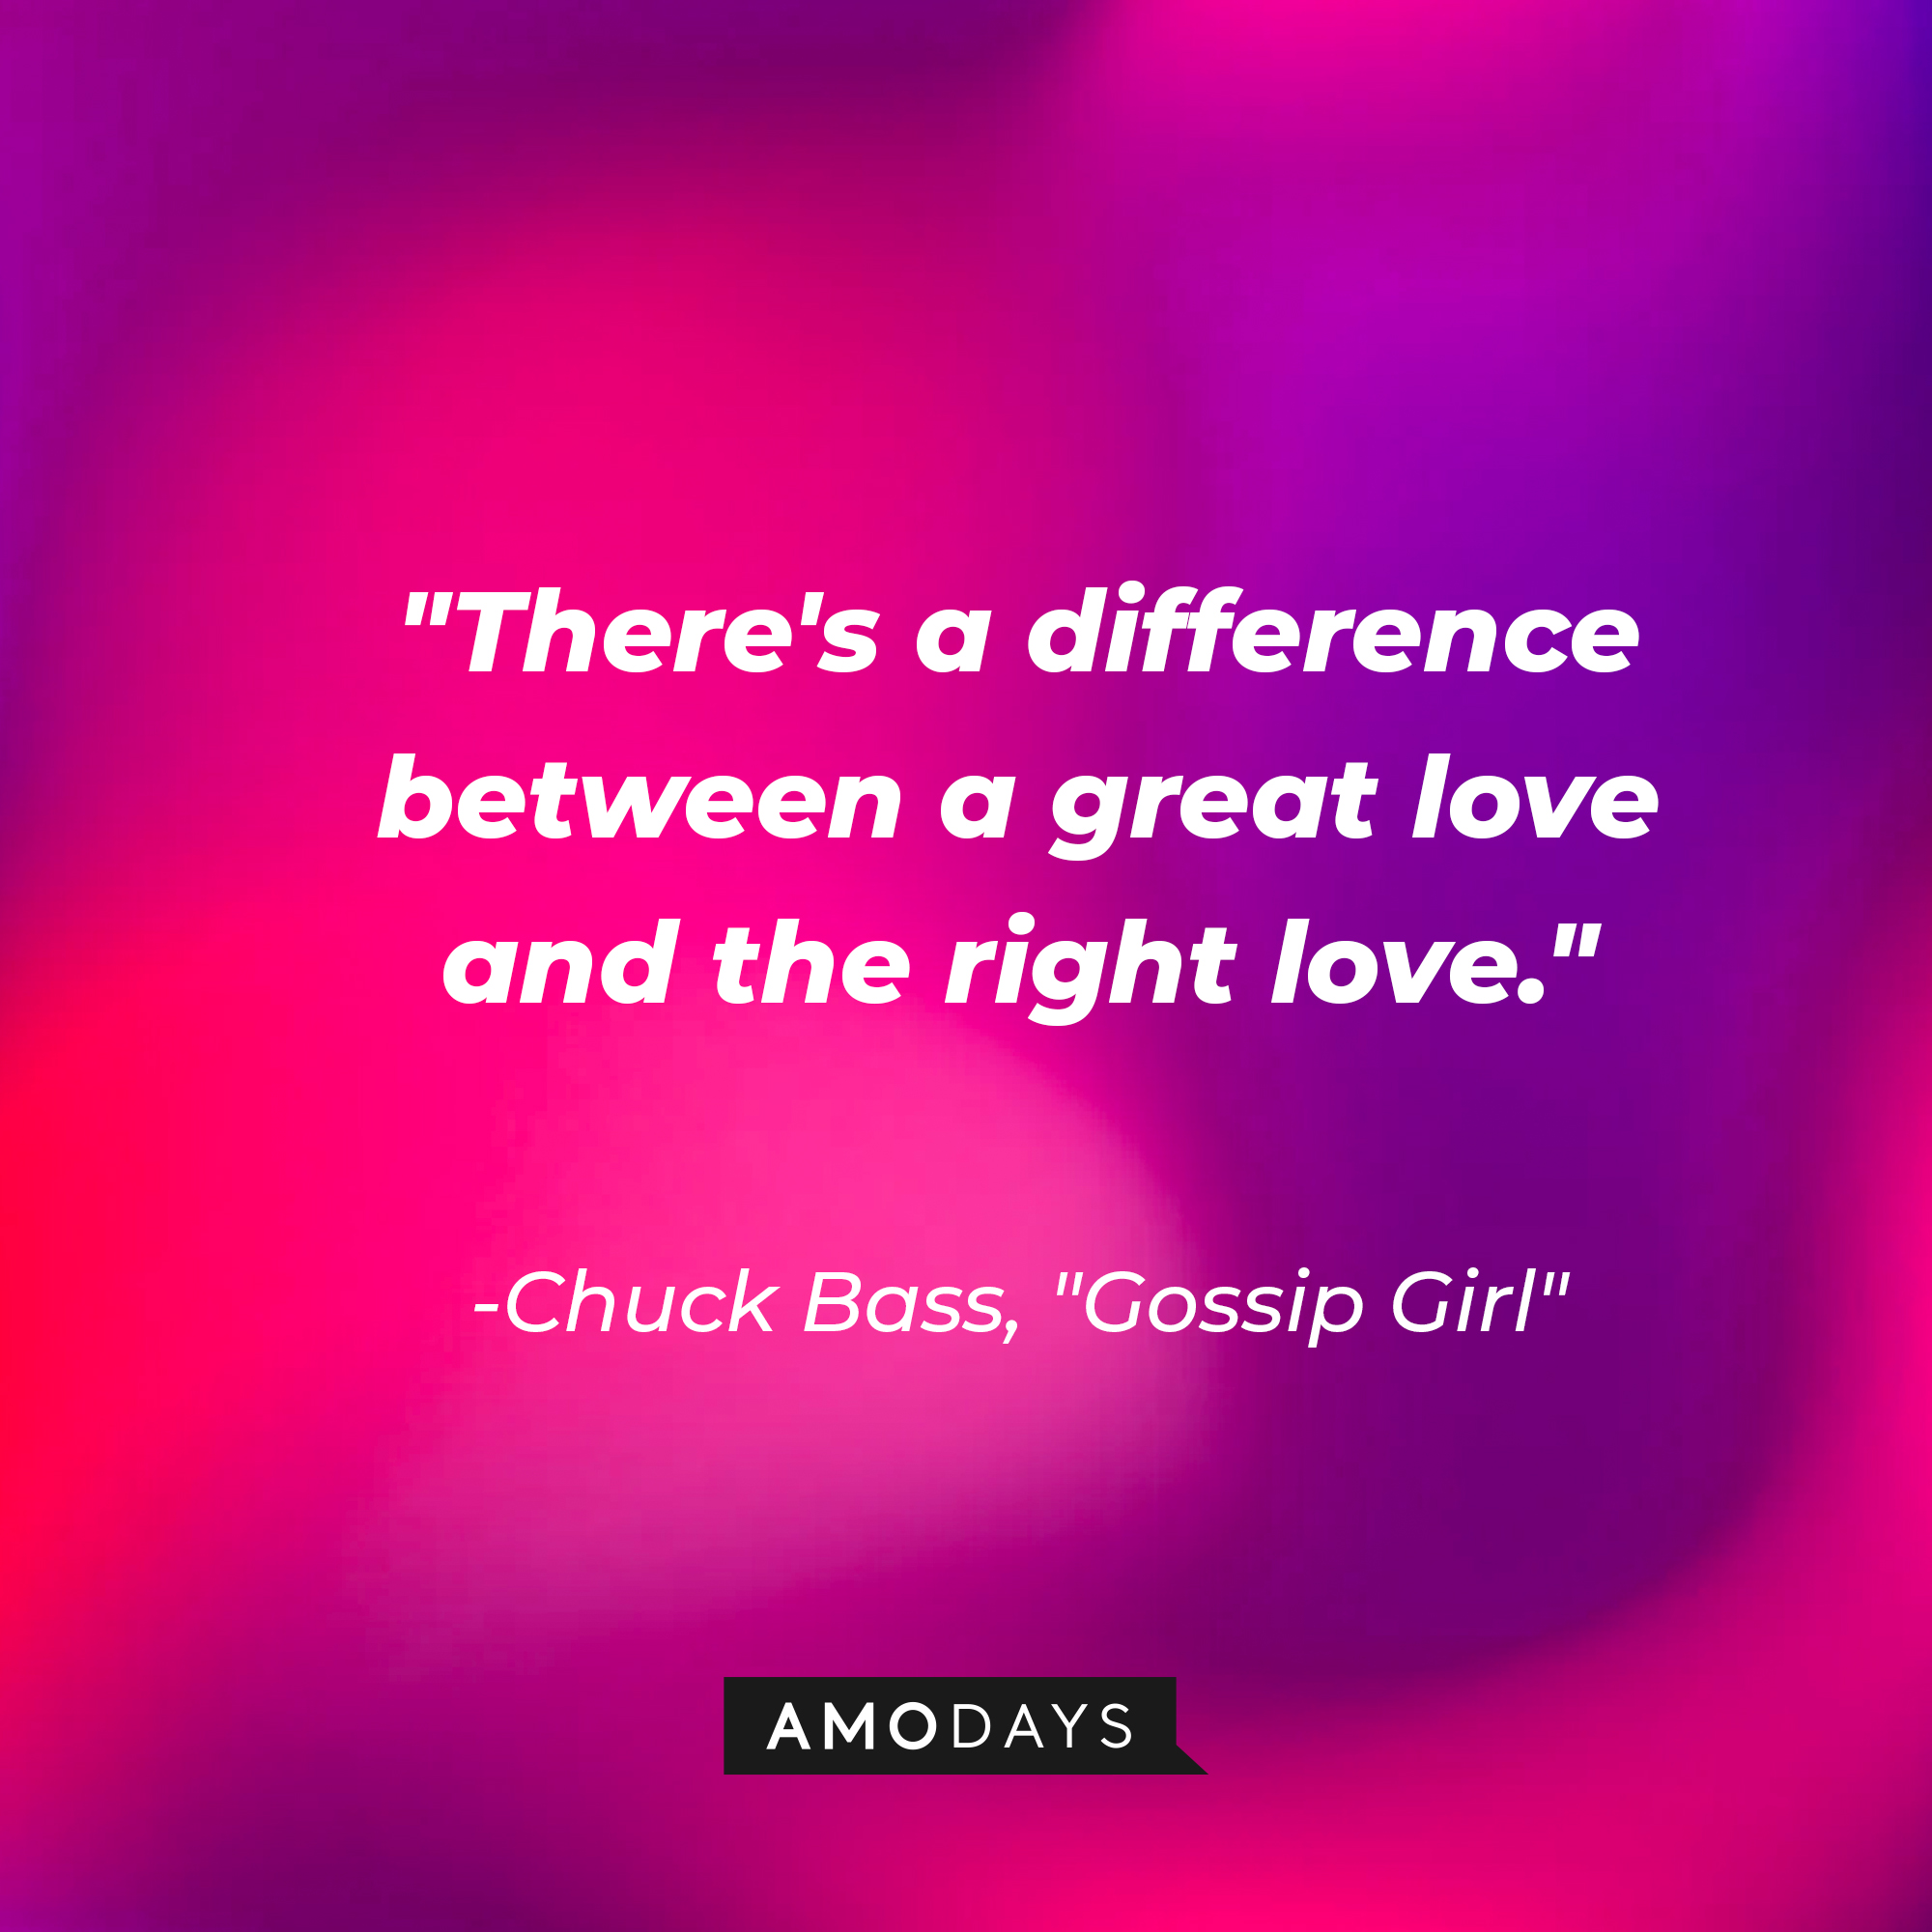 Chuck Bass' quote: "There's a difference between a great love and the right love." | Source: AmoDays